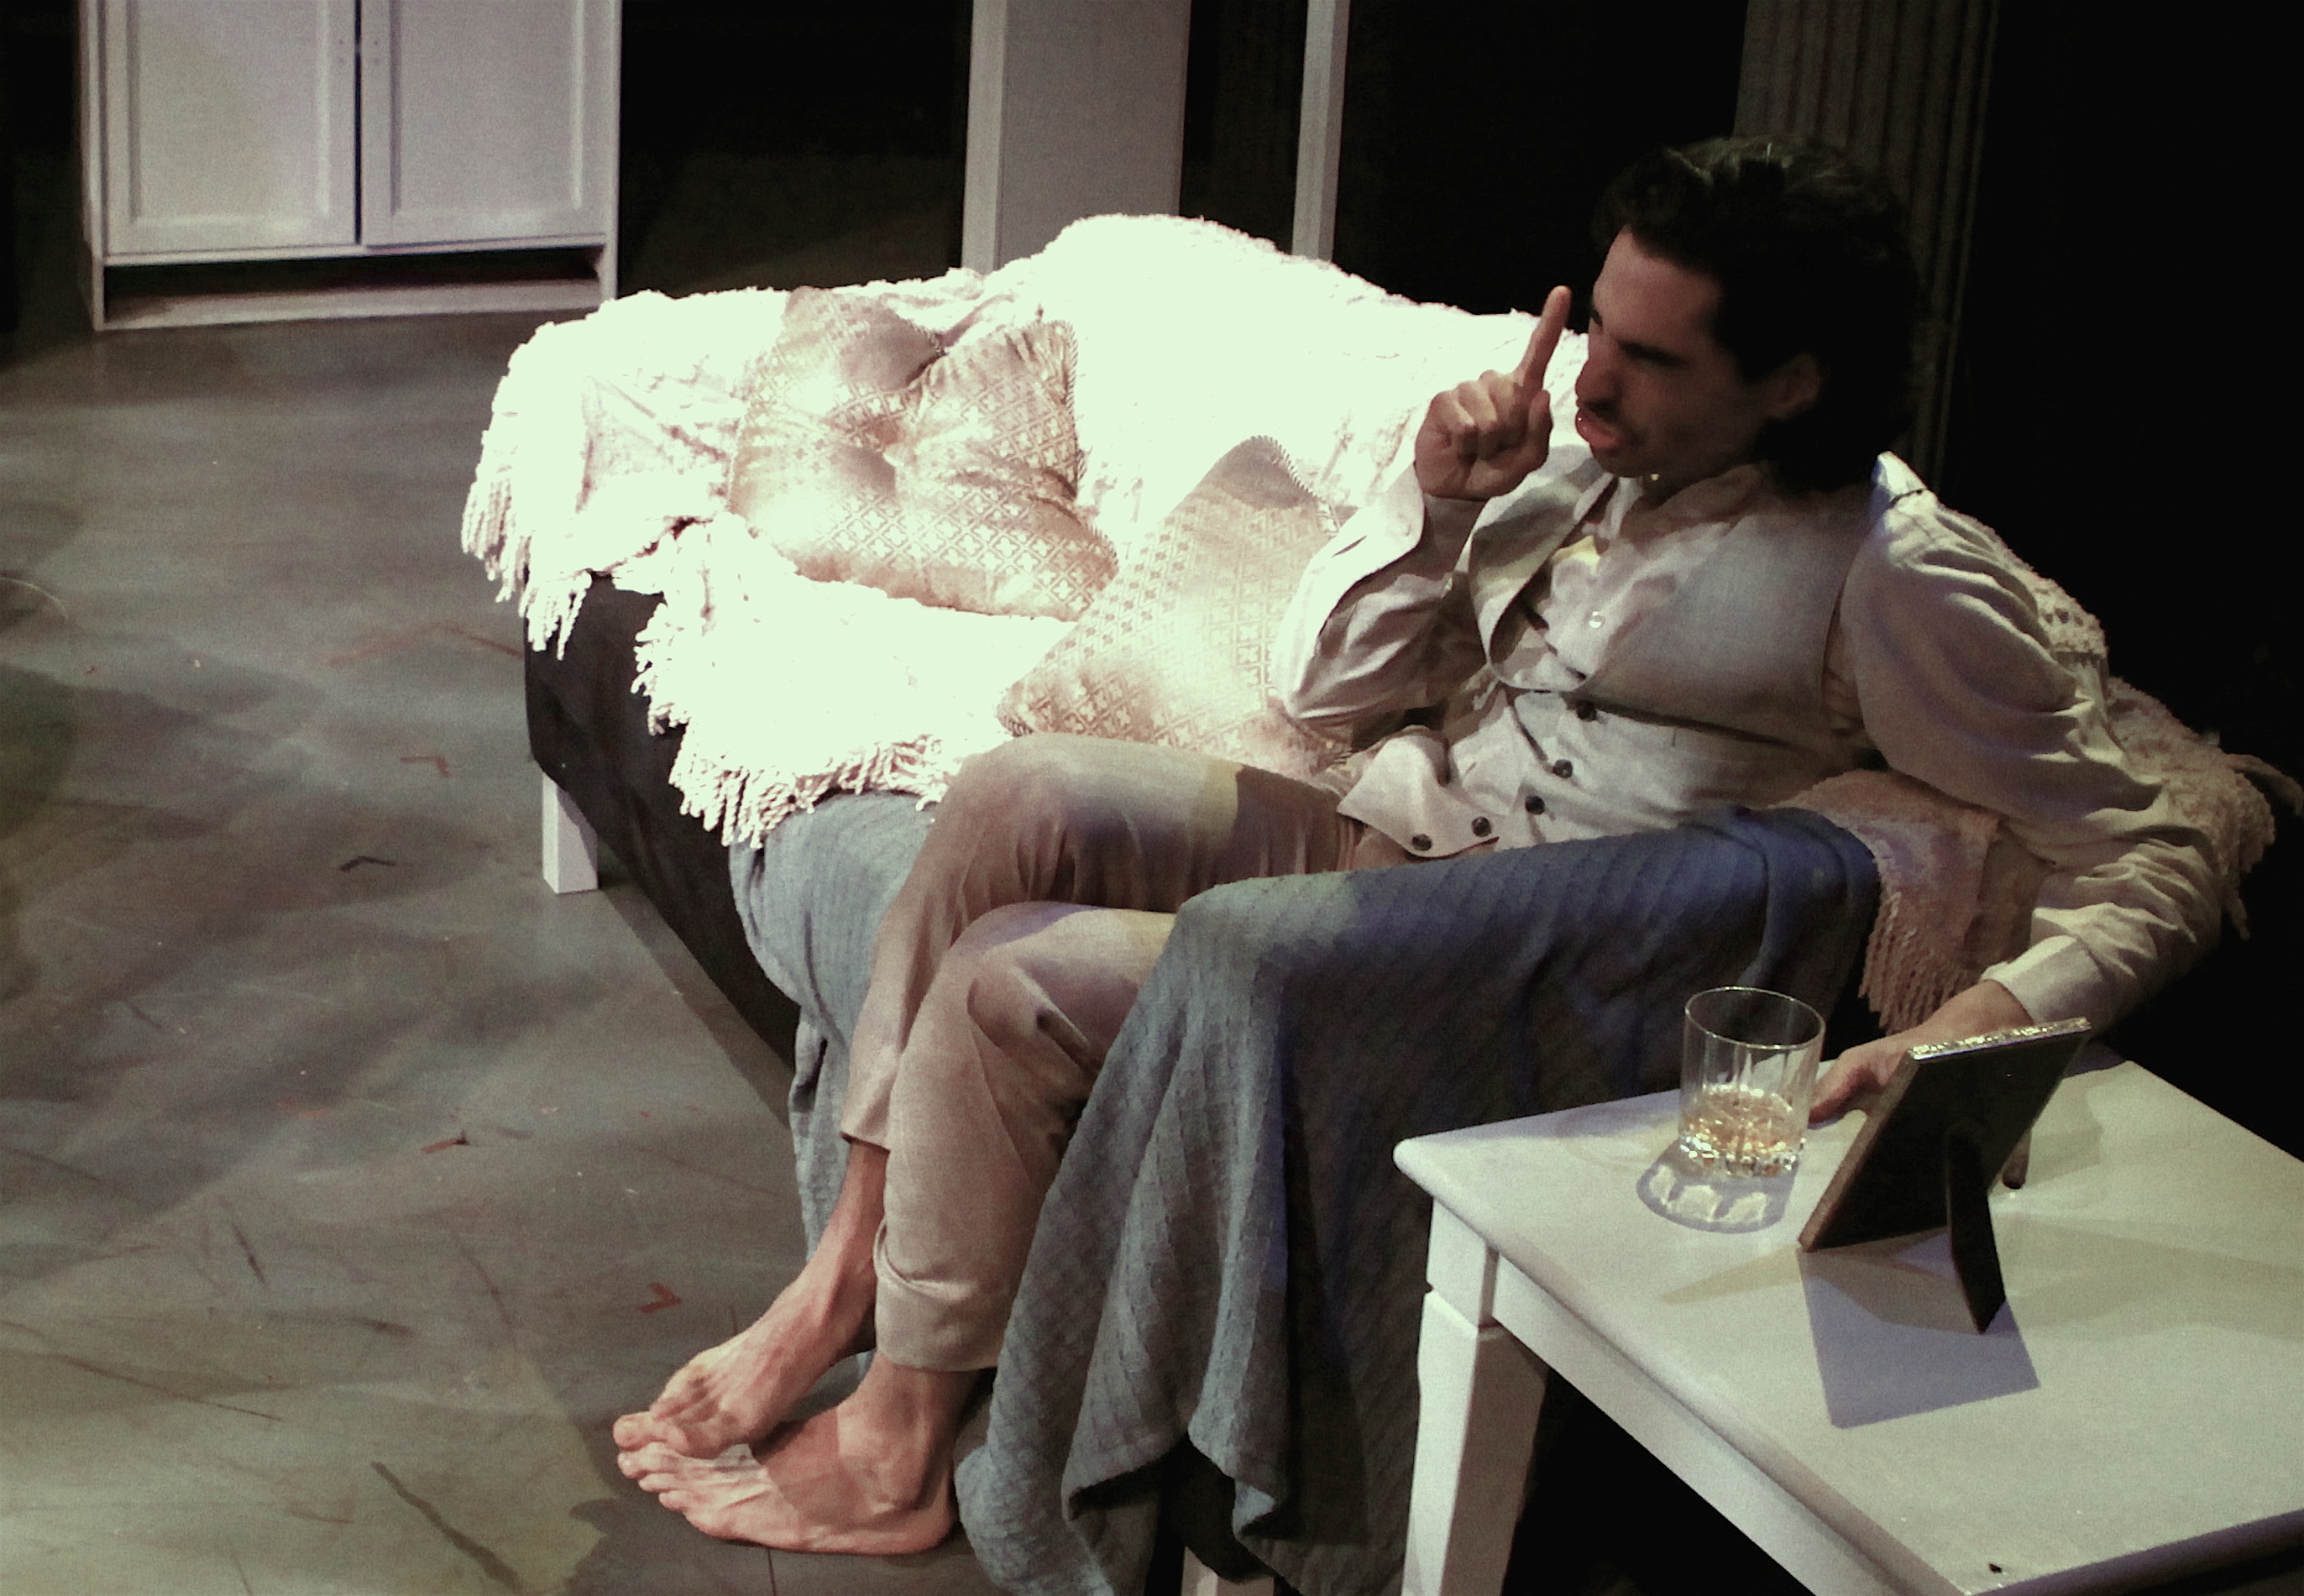 R-J as Edmund in Long Day's Journey Into Night